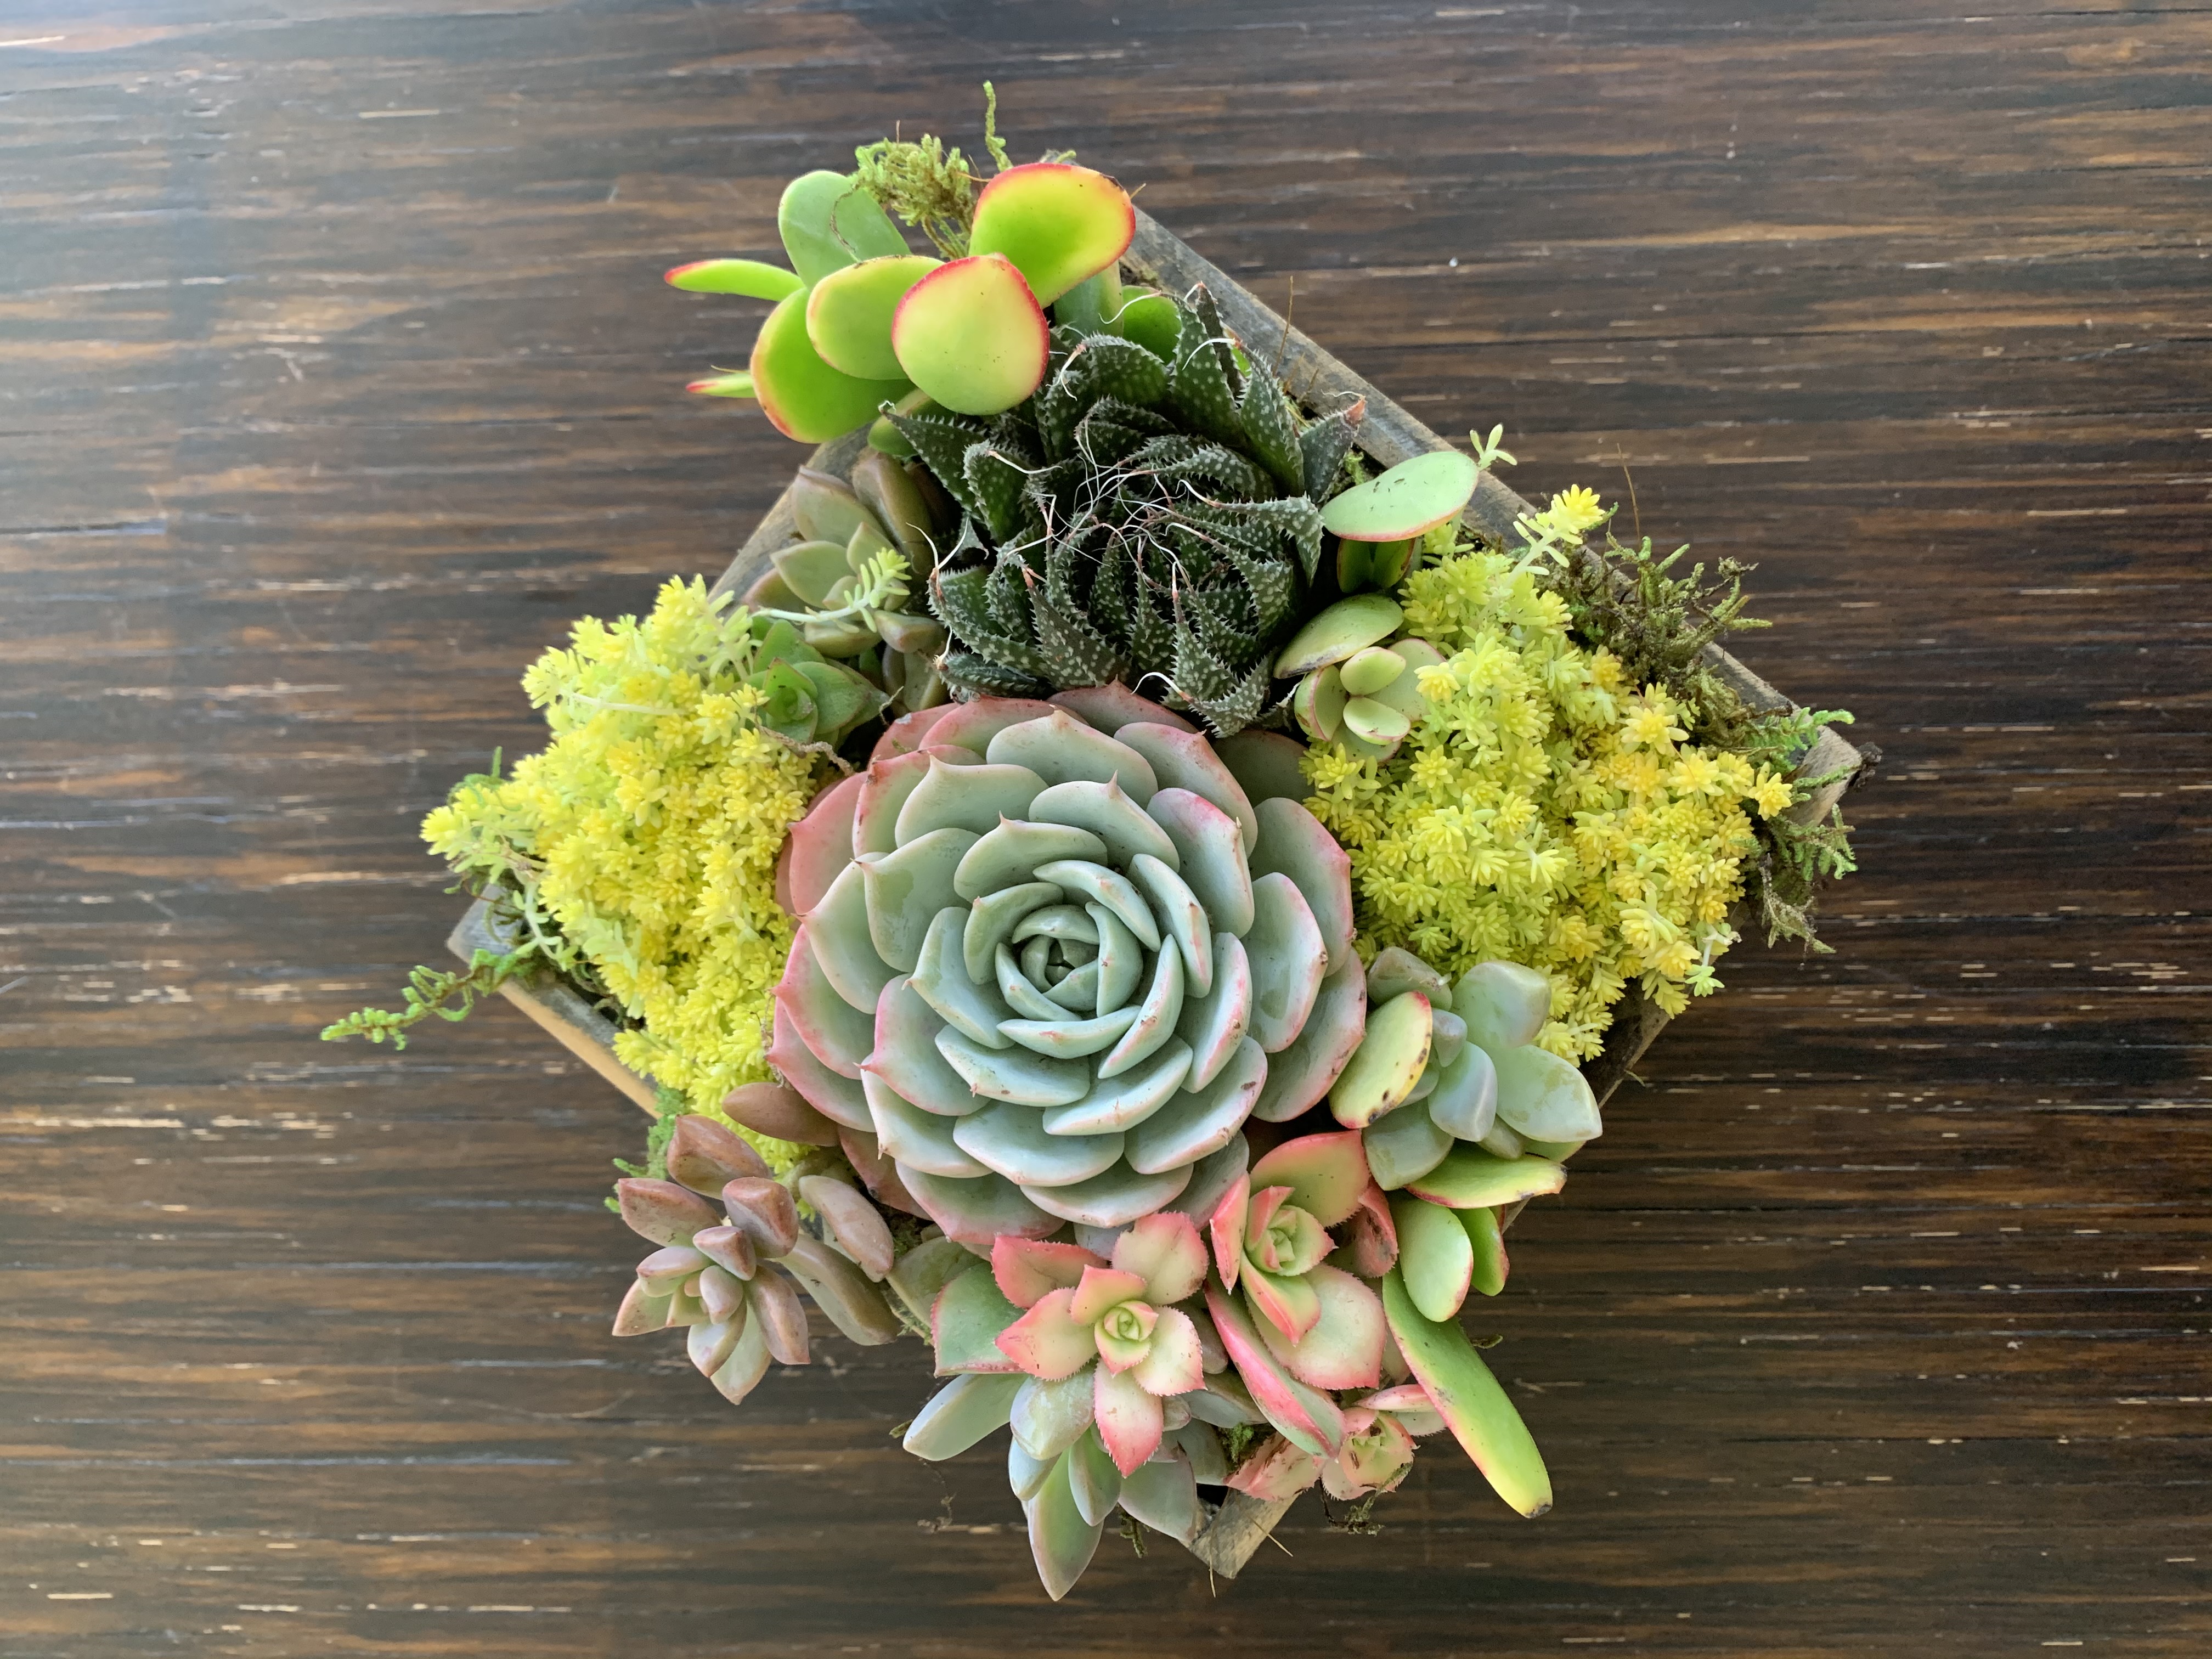 Succulent Gifts & Arrangements with Love, Humor and Customization